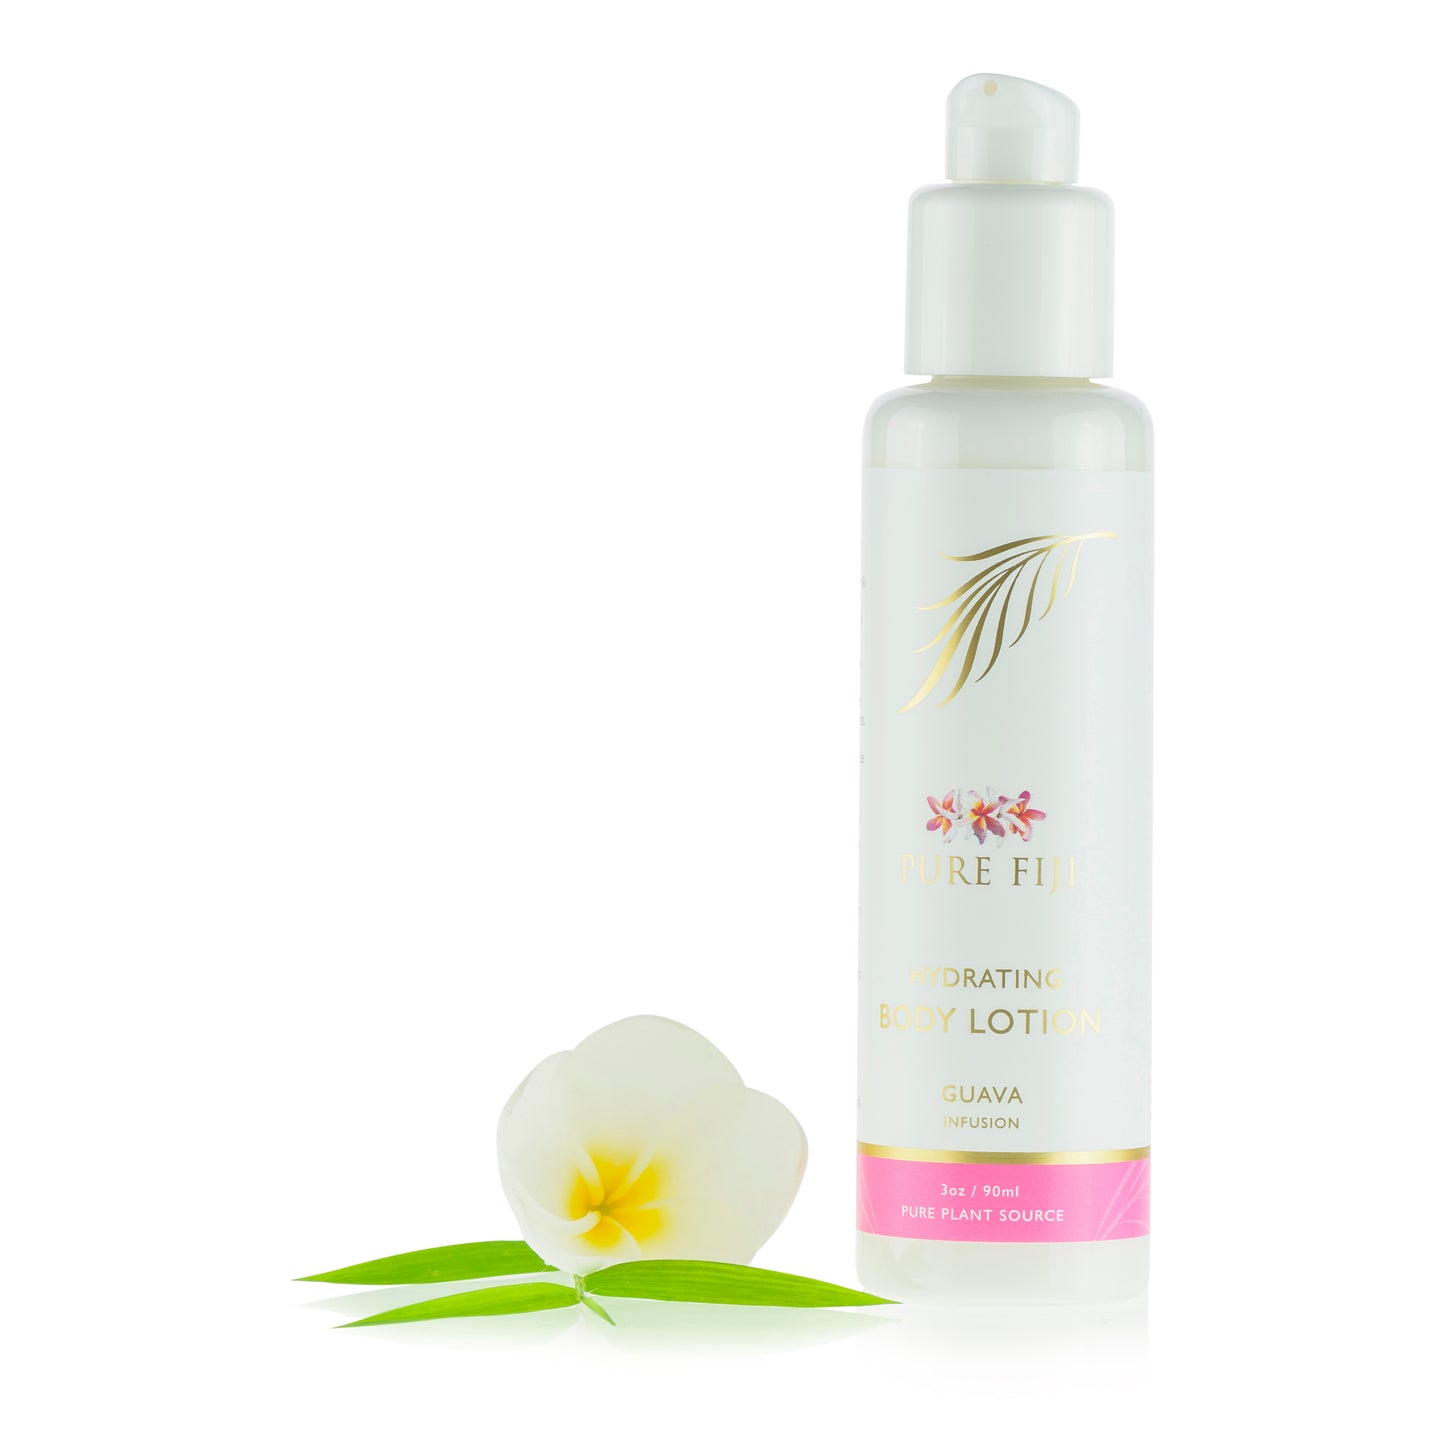 Hydrating Body Lotion - Guava